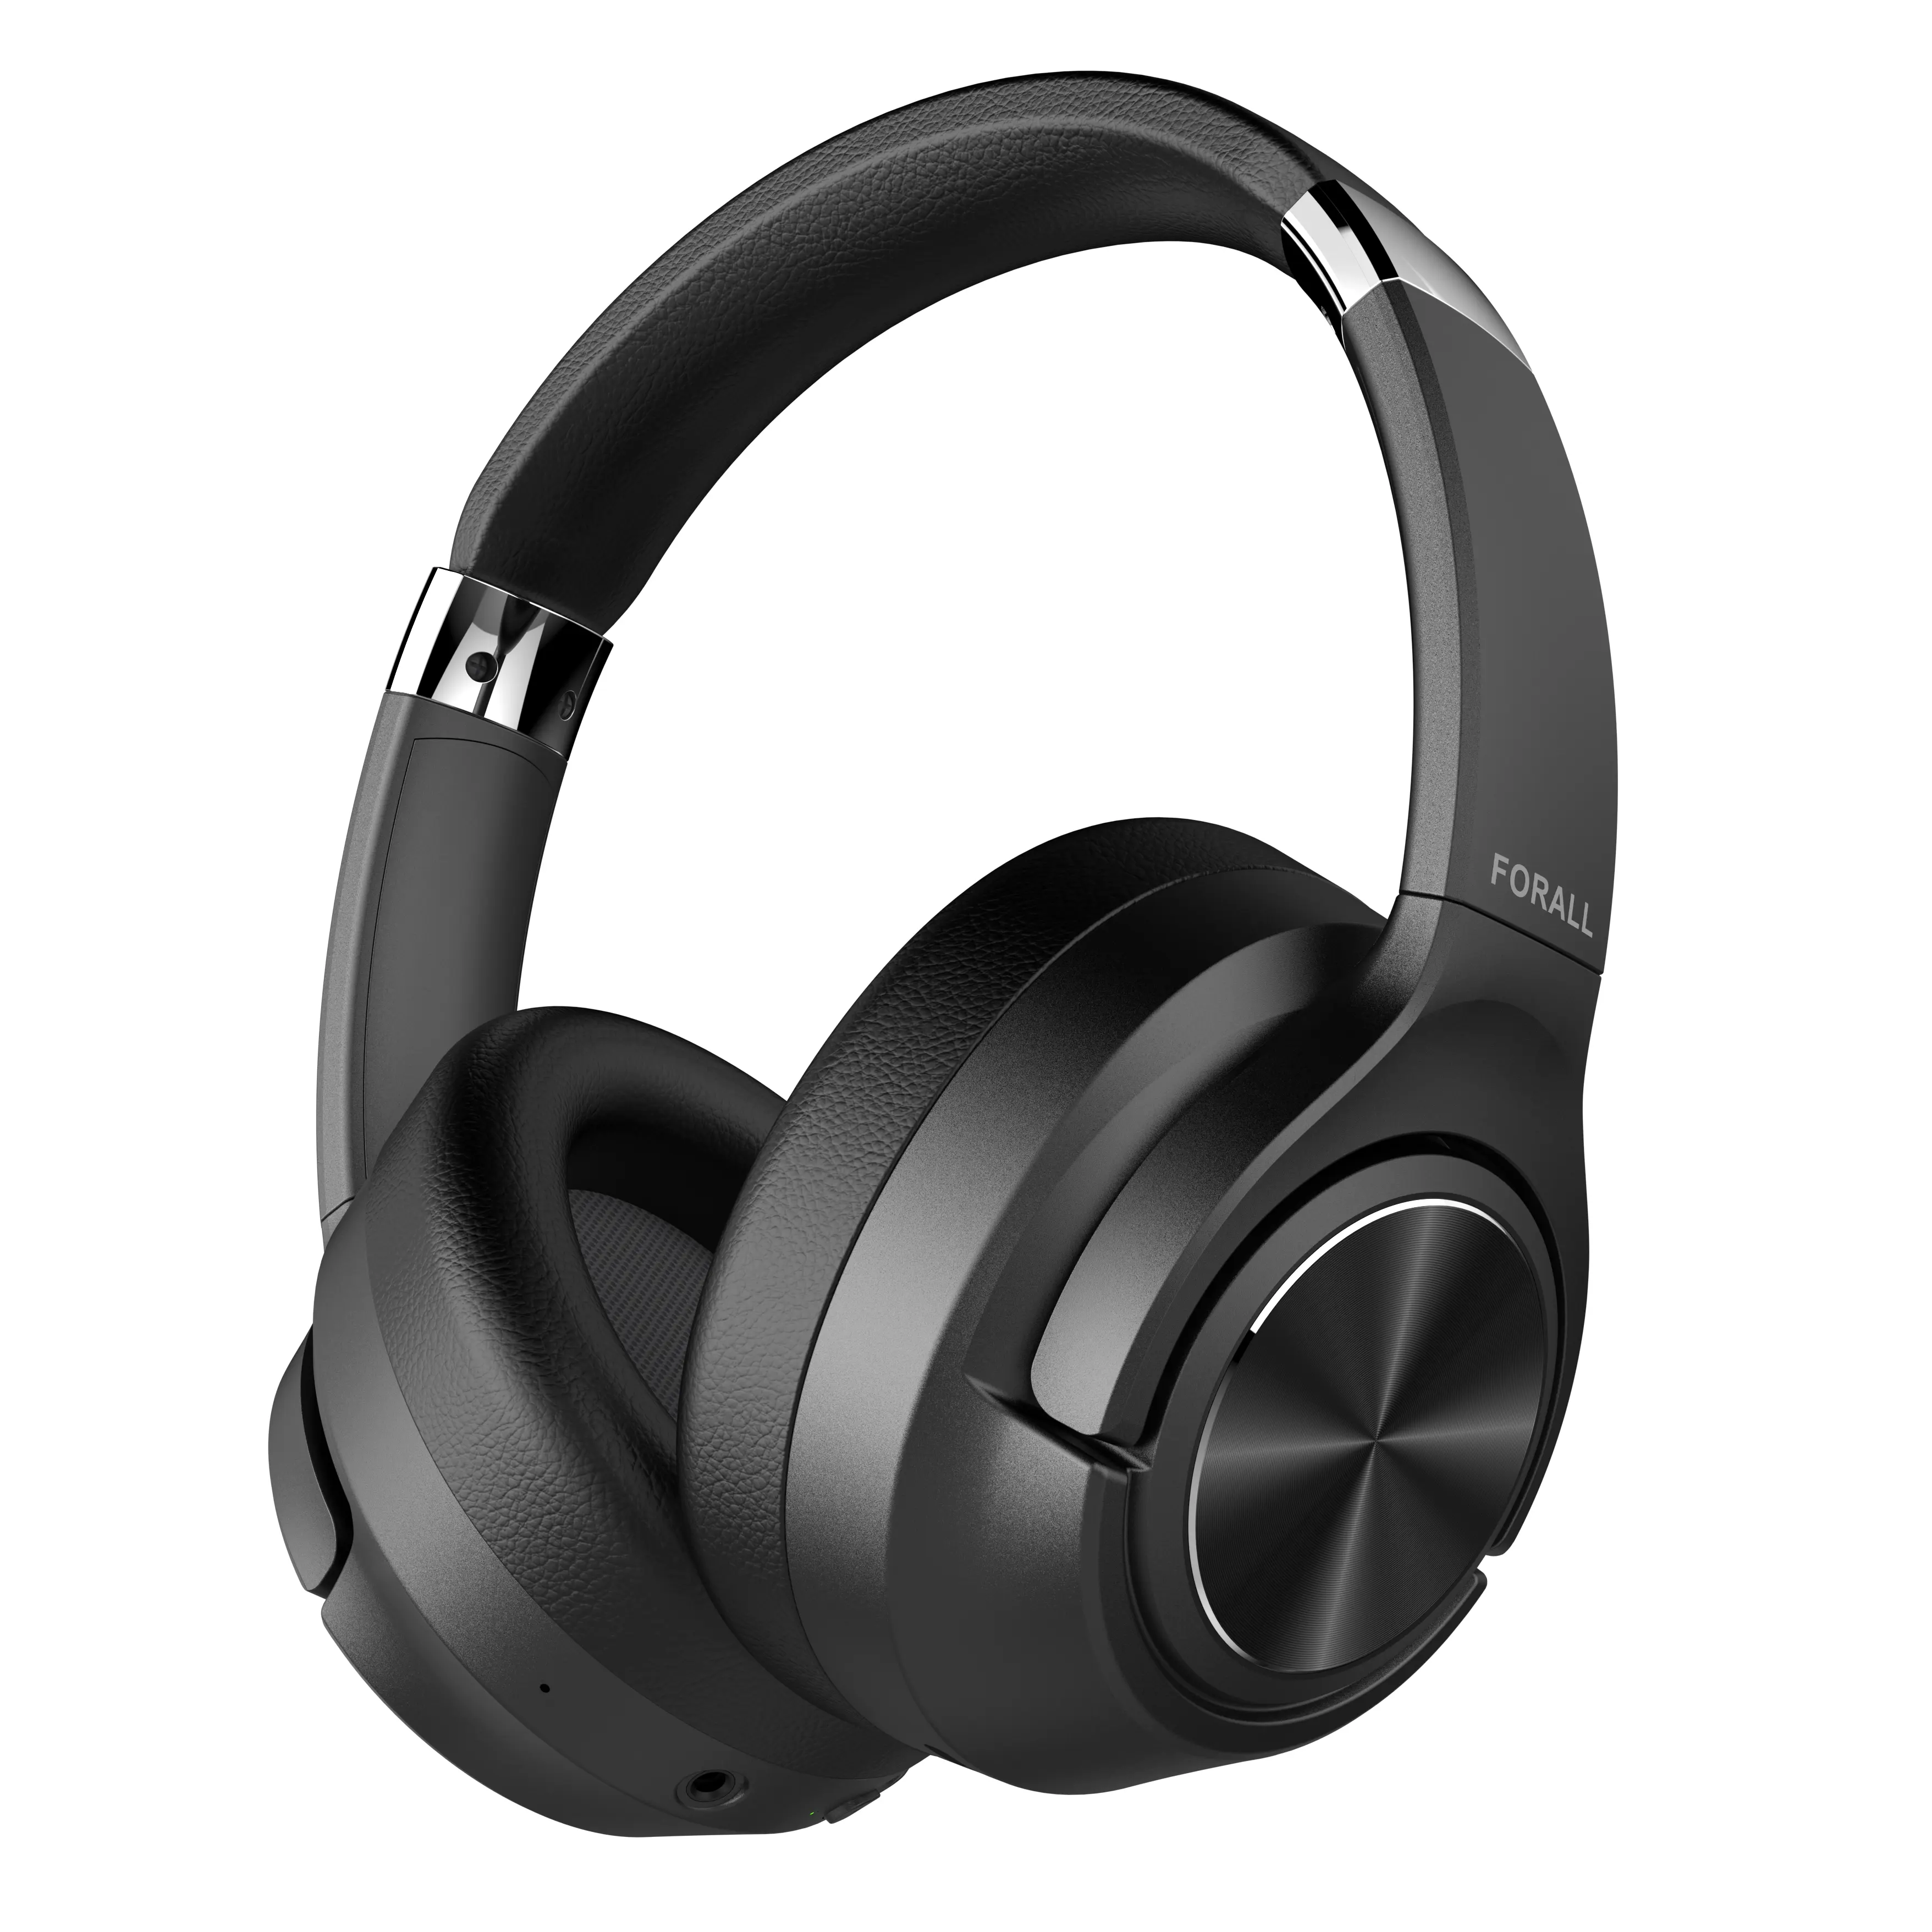 40mm Dynamic Driver Noise Cancellation Transparency Mode Headphone